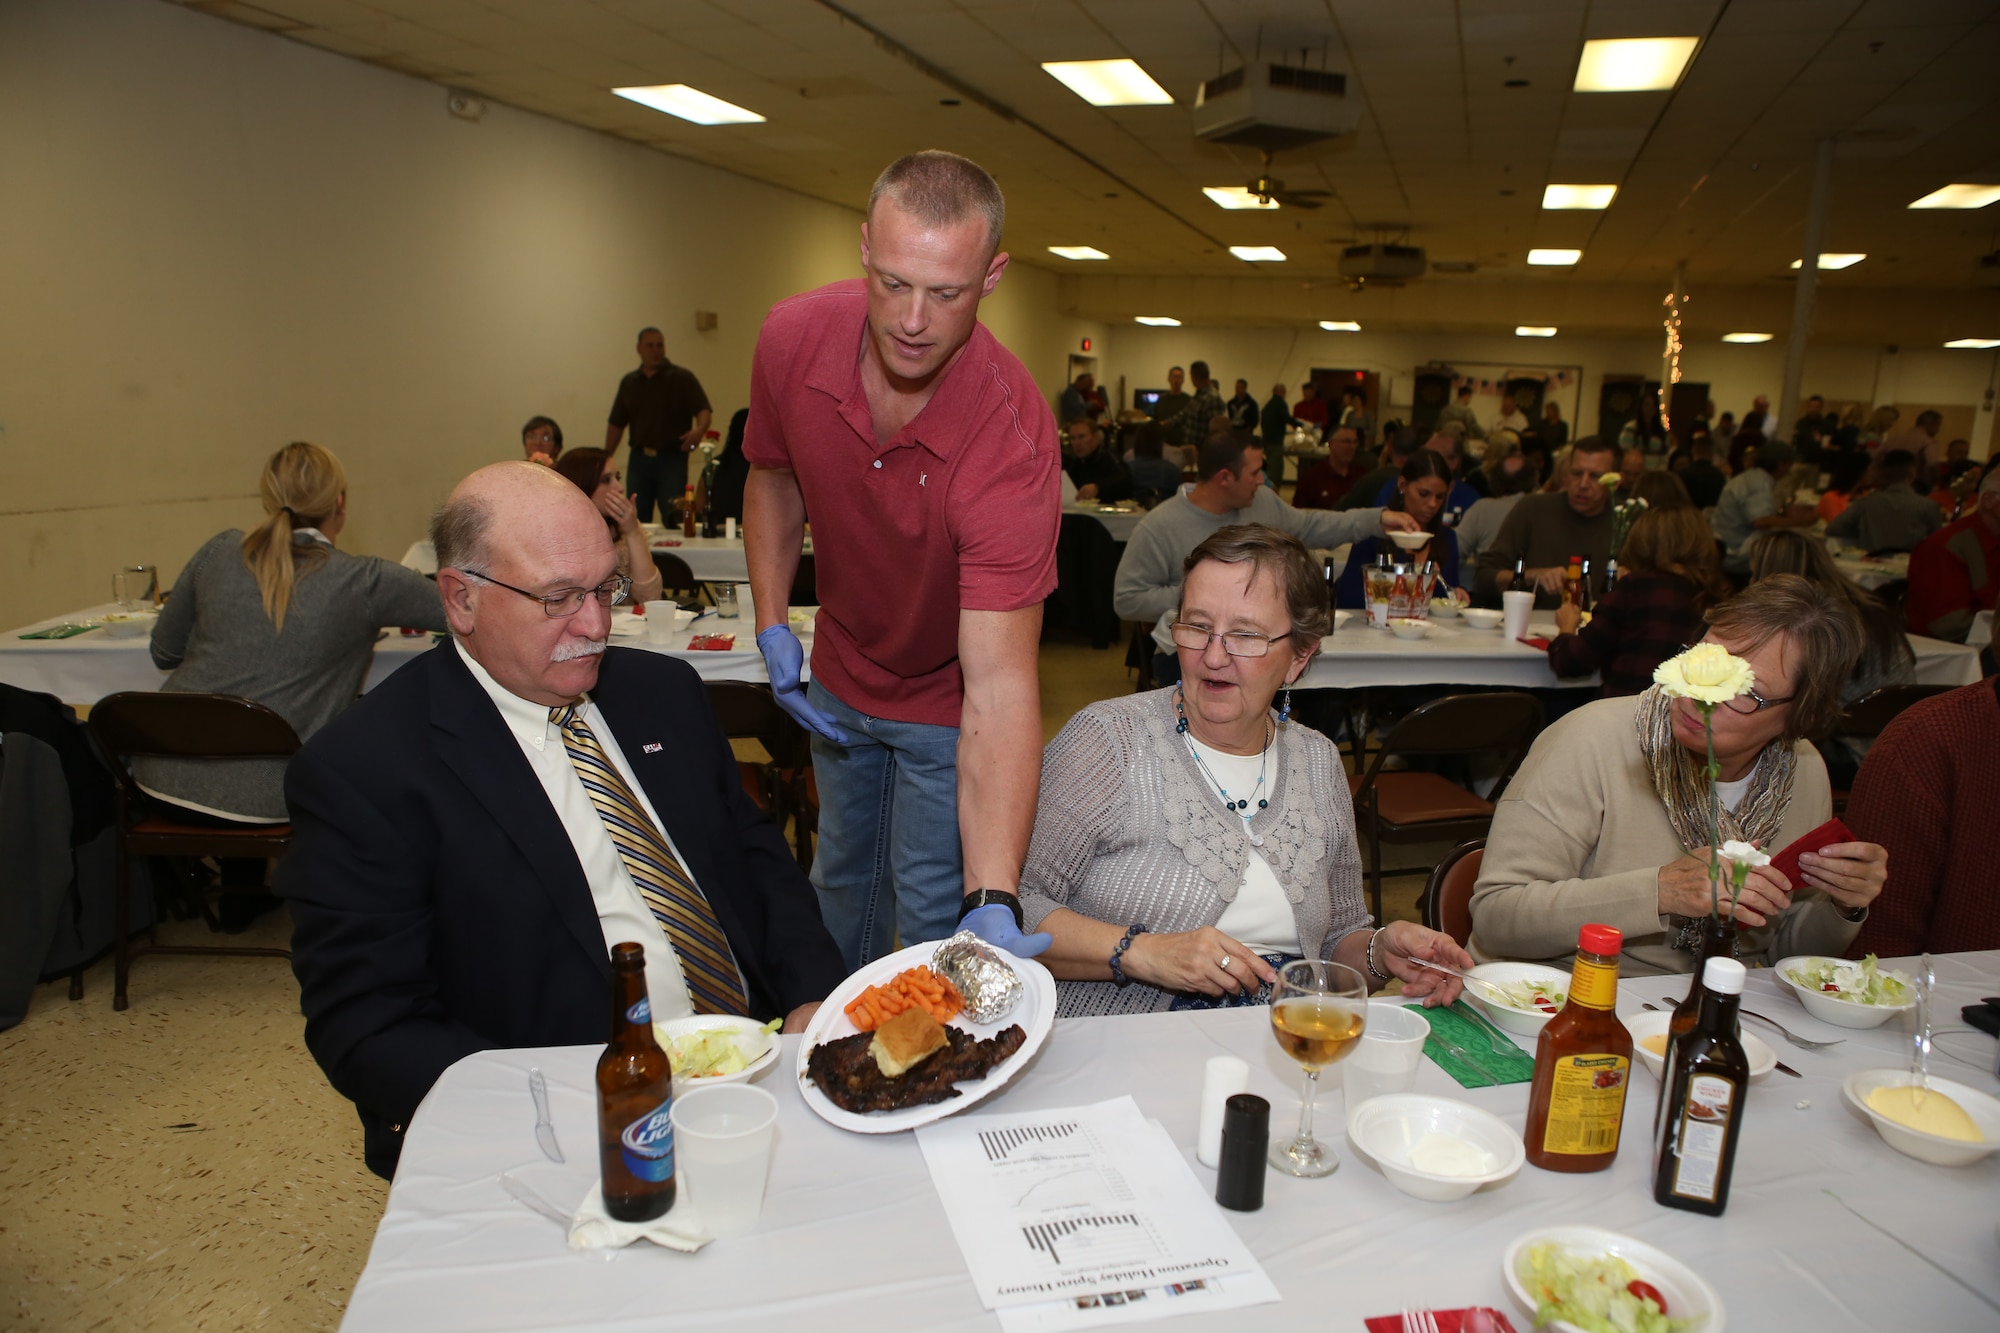 An Operation Holiday Spirit volunteer serves up a steak dinner on November 1 during the annual fundraiser at the Del City American Legion. OHS is a non-profit organization that raises support for local Reserve and Guard Airmen in need. (U.S. Air Force photo/Staff Sgt. Caleb Wanzer)